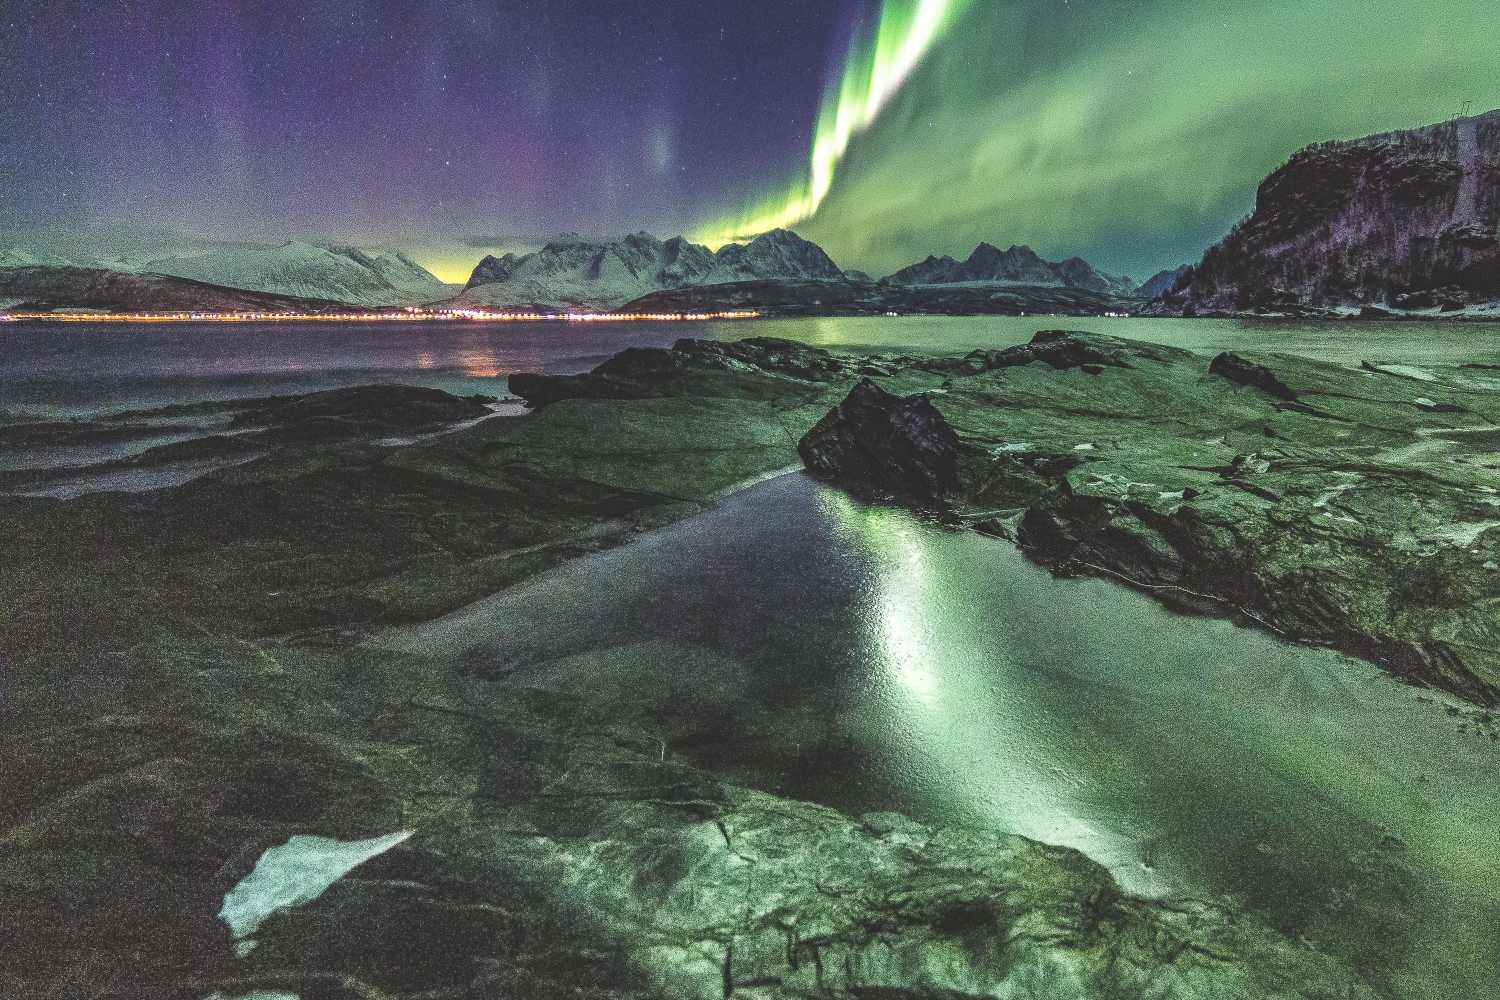 Swirling northern lights reflected over water